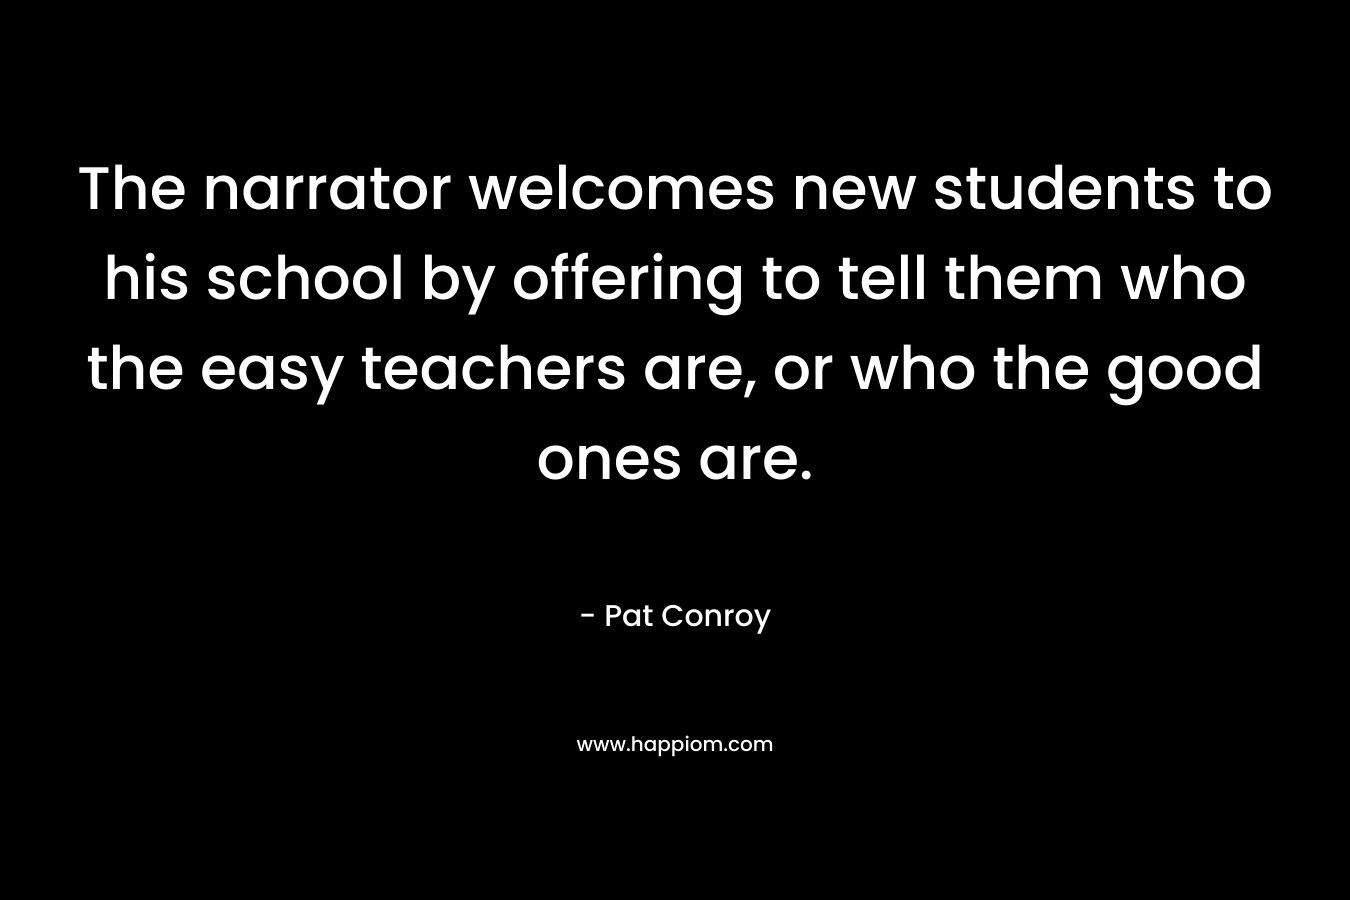 The narrator welcomes new students to his school by offering to tell them who the easy teachers are, or who the good ones are.